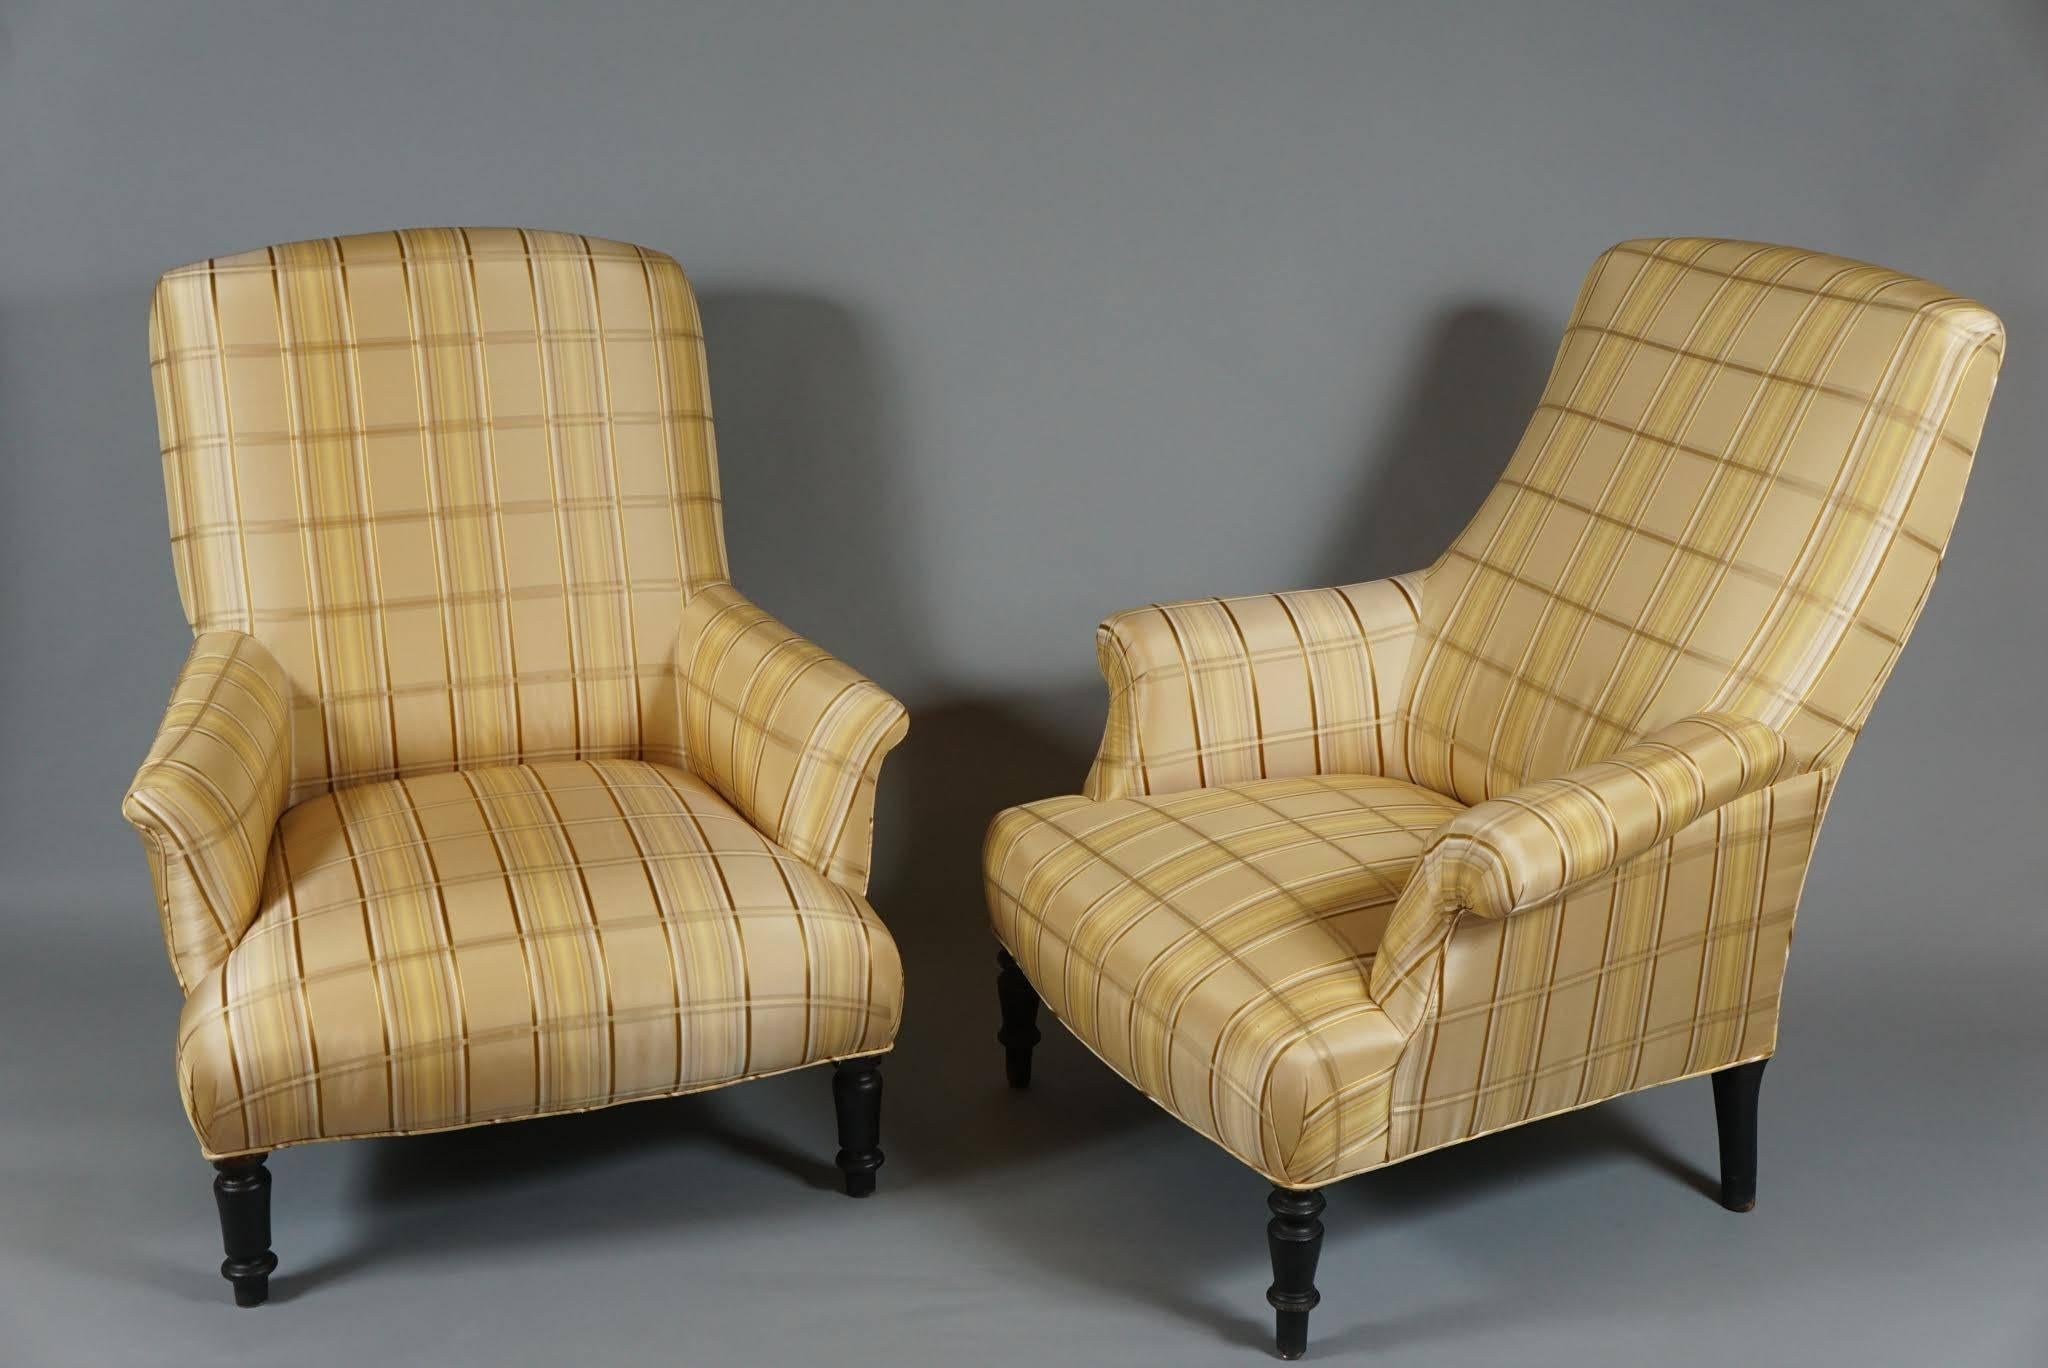 Chairs and Ottoman recently Upholstered in Silk
Ottoman measures 27